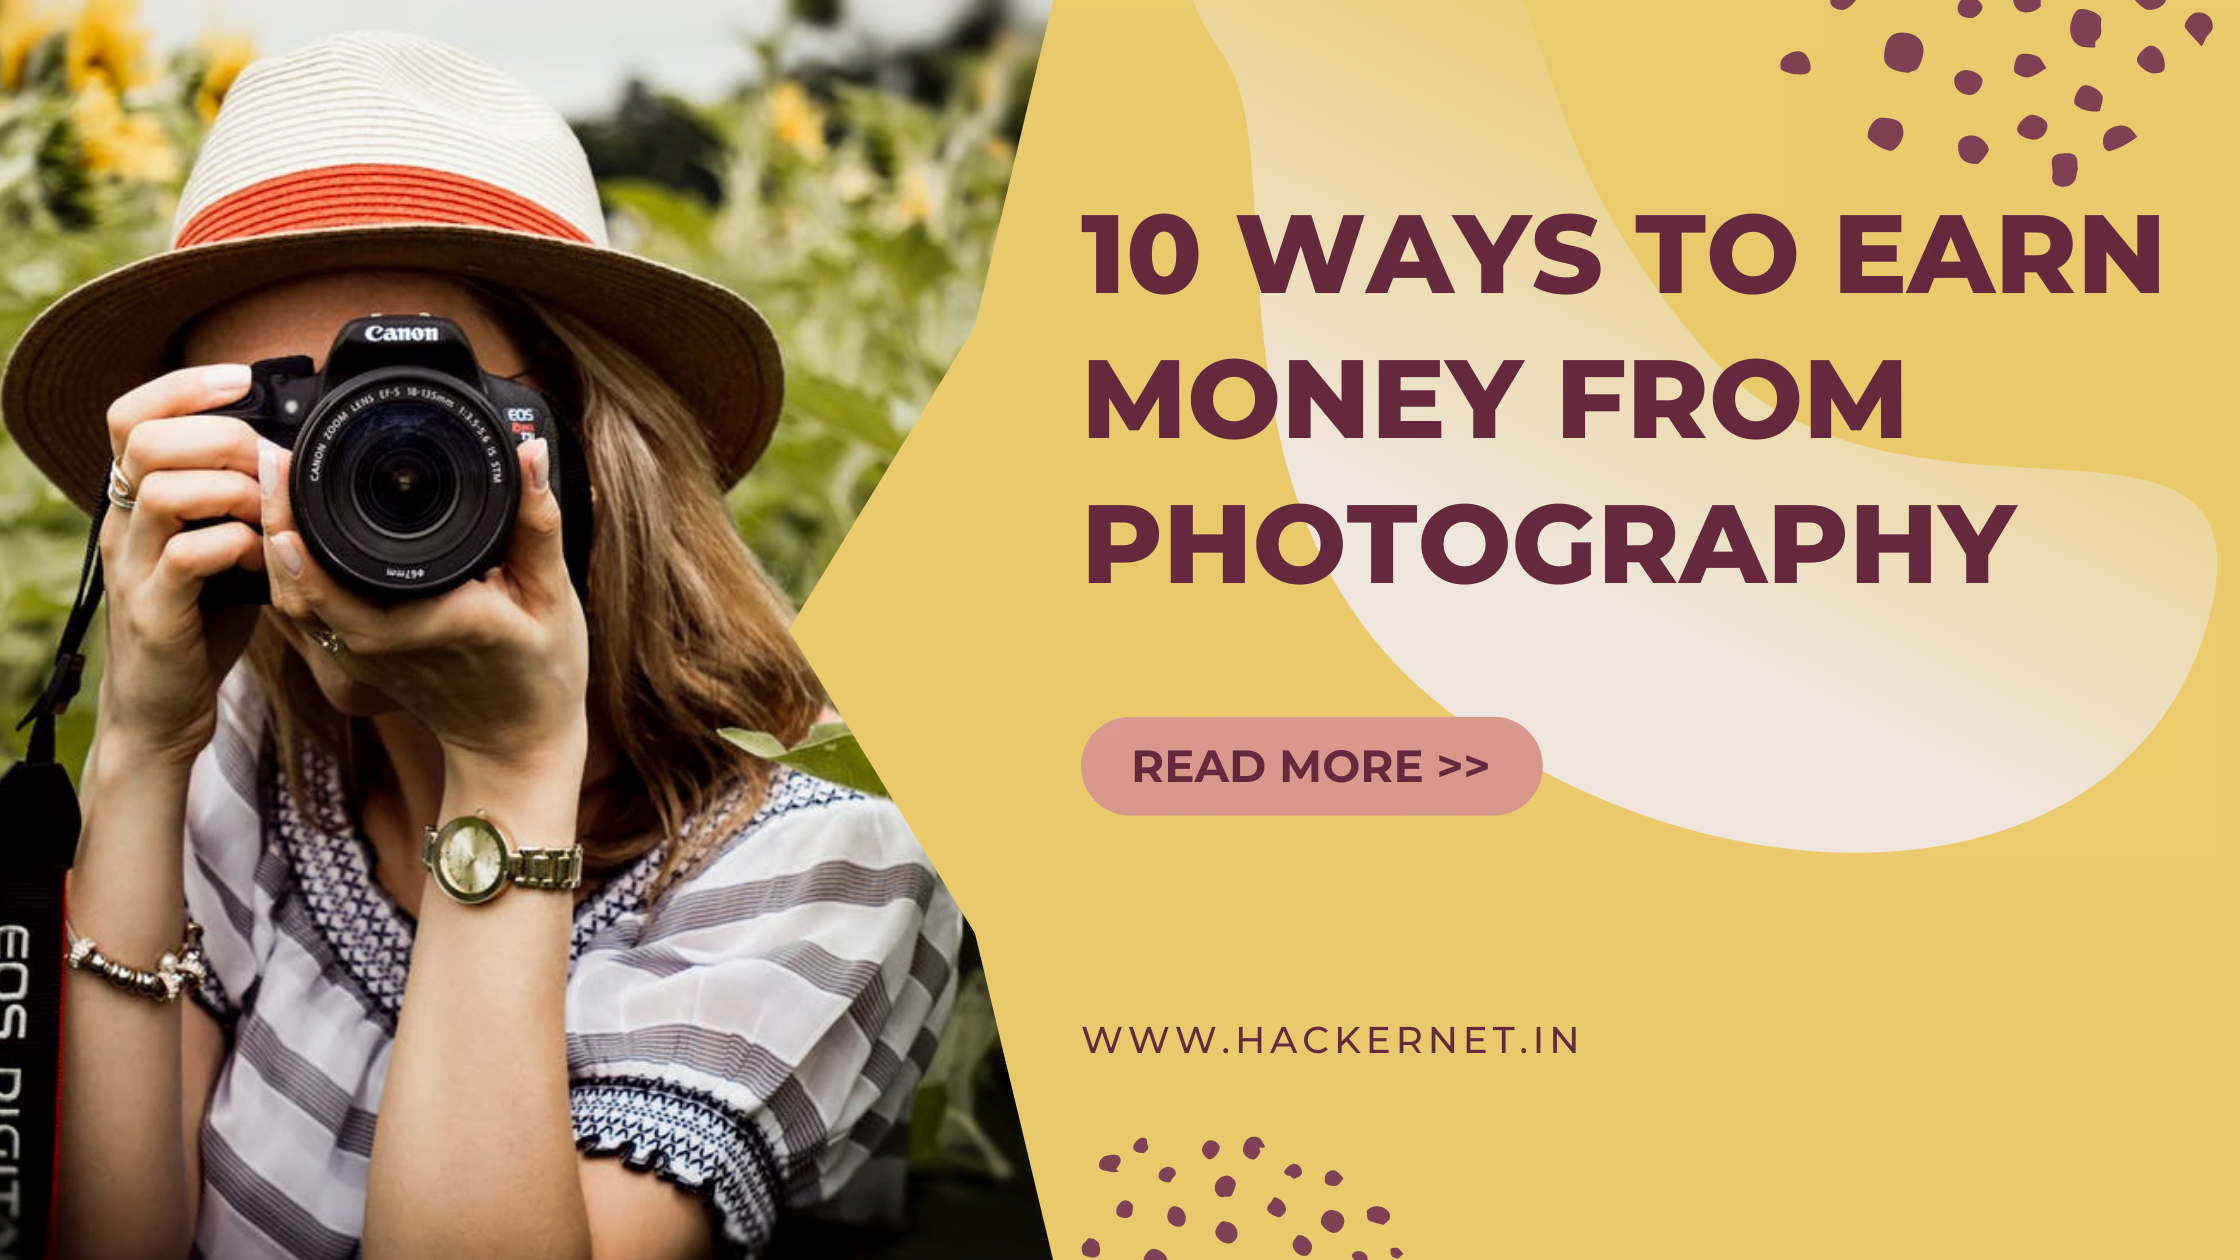 10 Ways to Earn Money from Photography